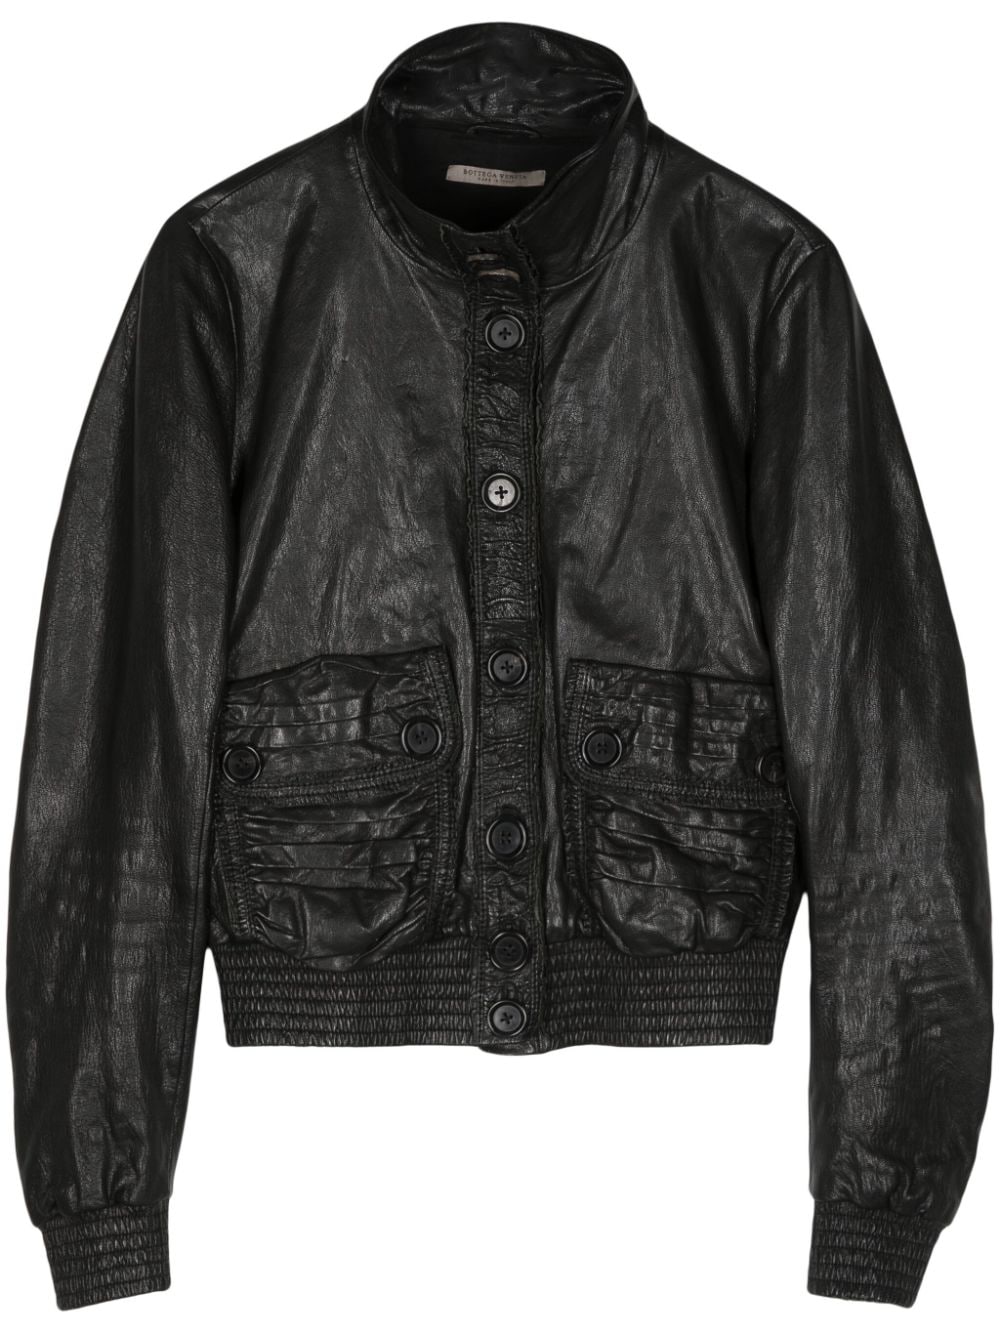 1990-2000s button-up leather jacket